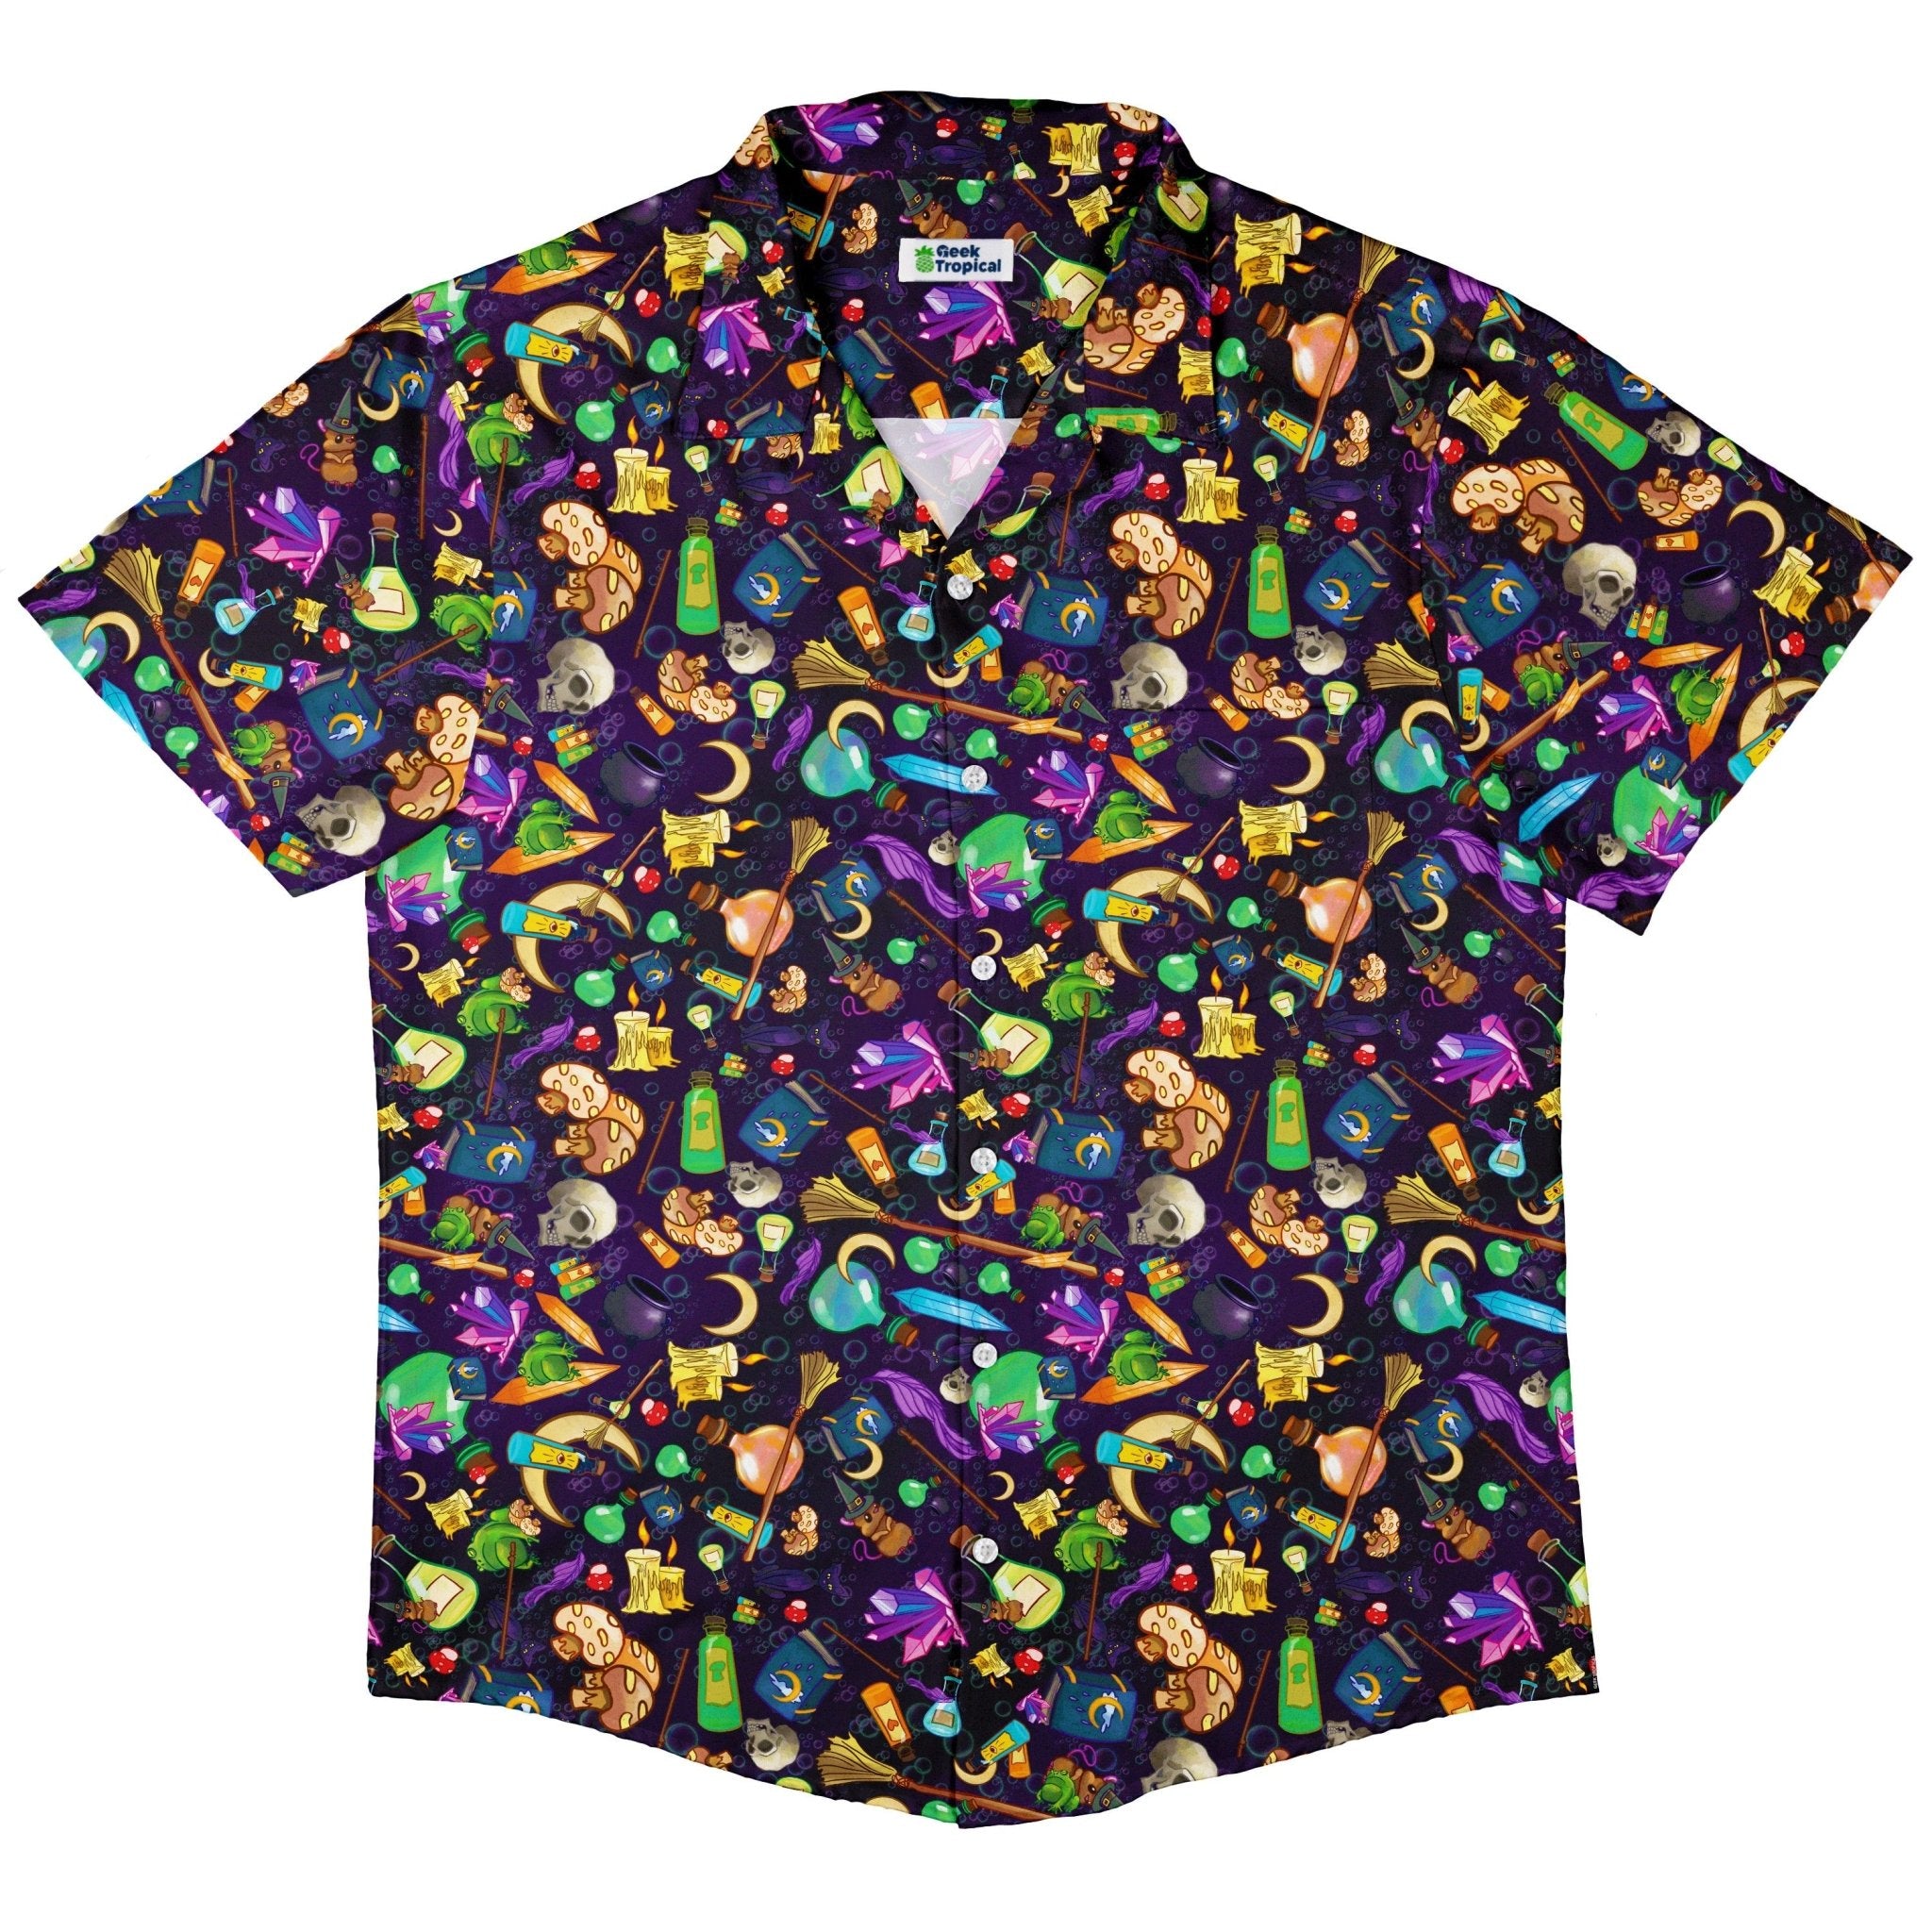 Witches Potion Brew Button Up Shirt - adult sizing - Fantasy Prints - Maximalist Patterns